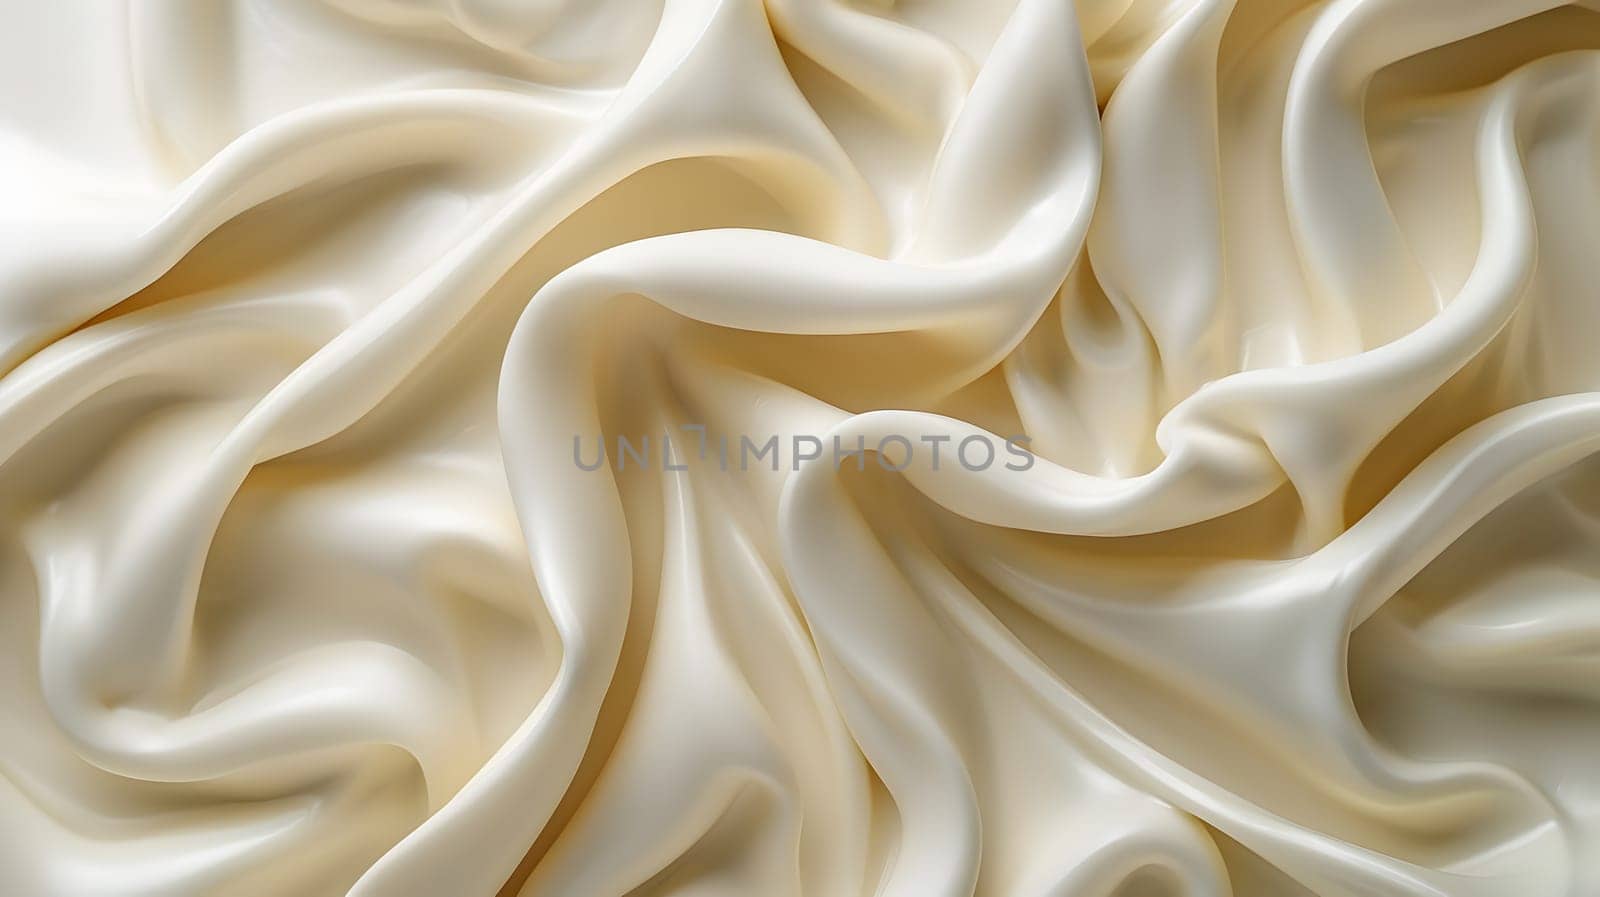 A detailed shot of a white satin fabric showcasing intricate wave patterns resembling the texture of peach fur. The softness and fluidity of the fabric evoke a sense of elegance and luxury